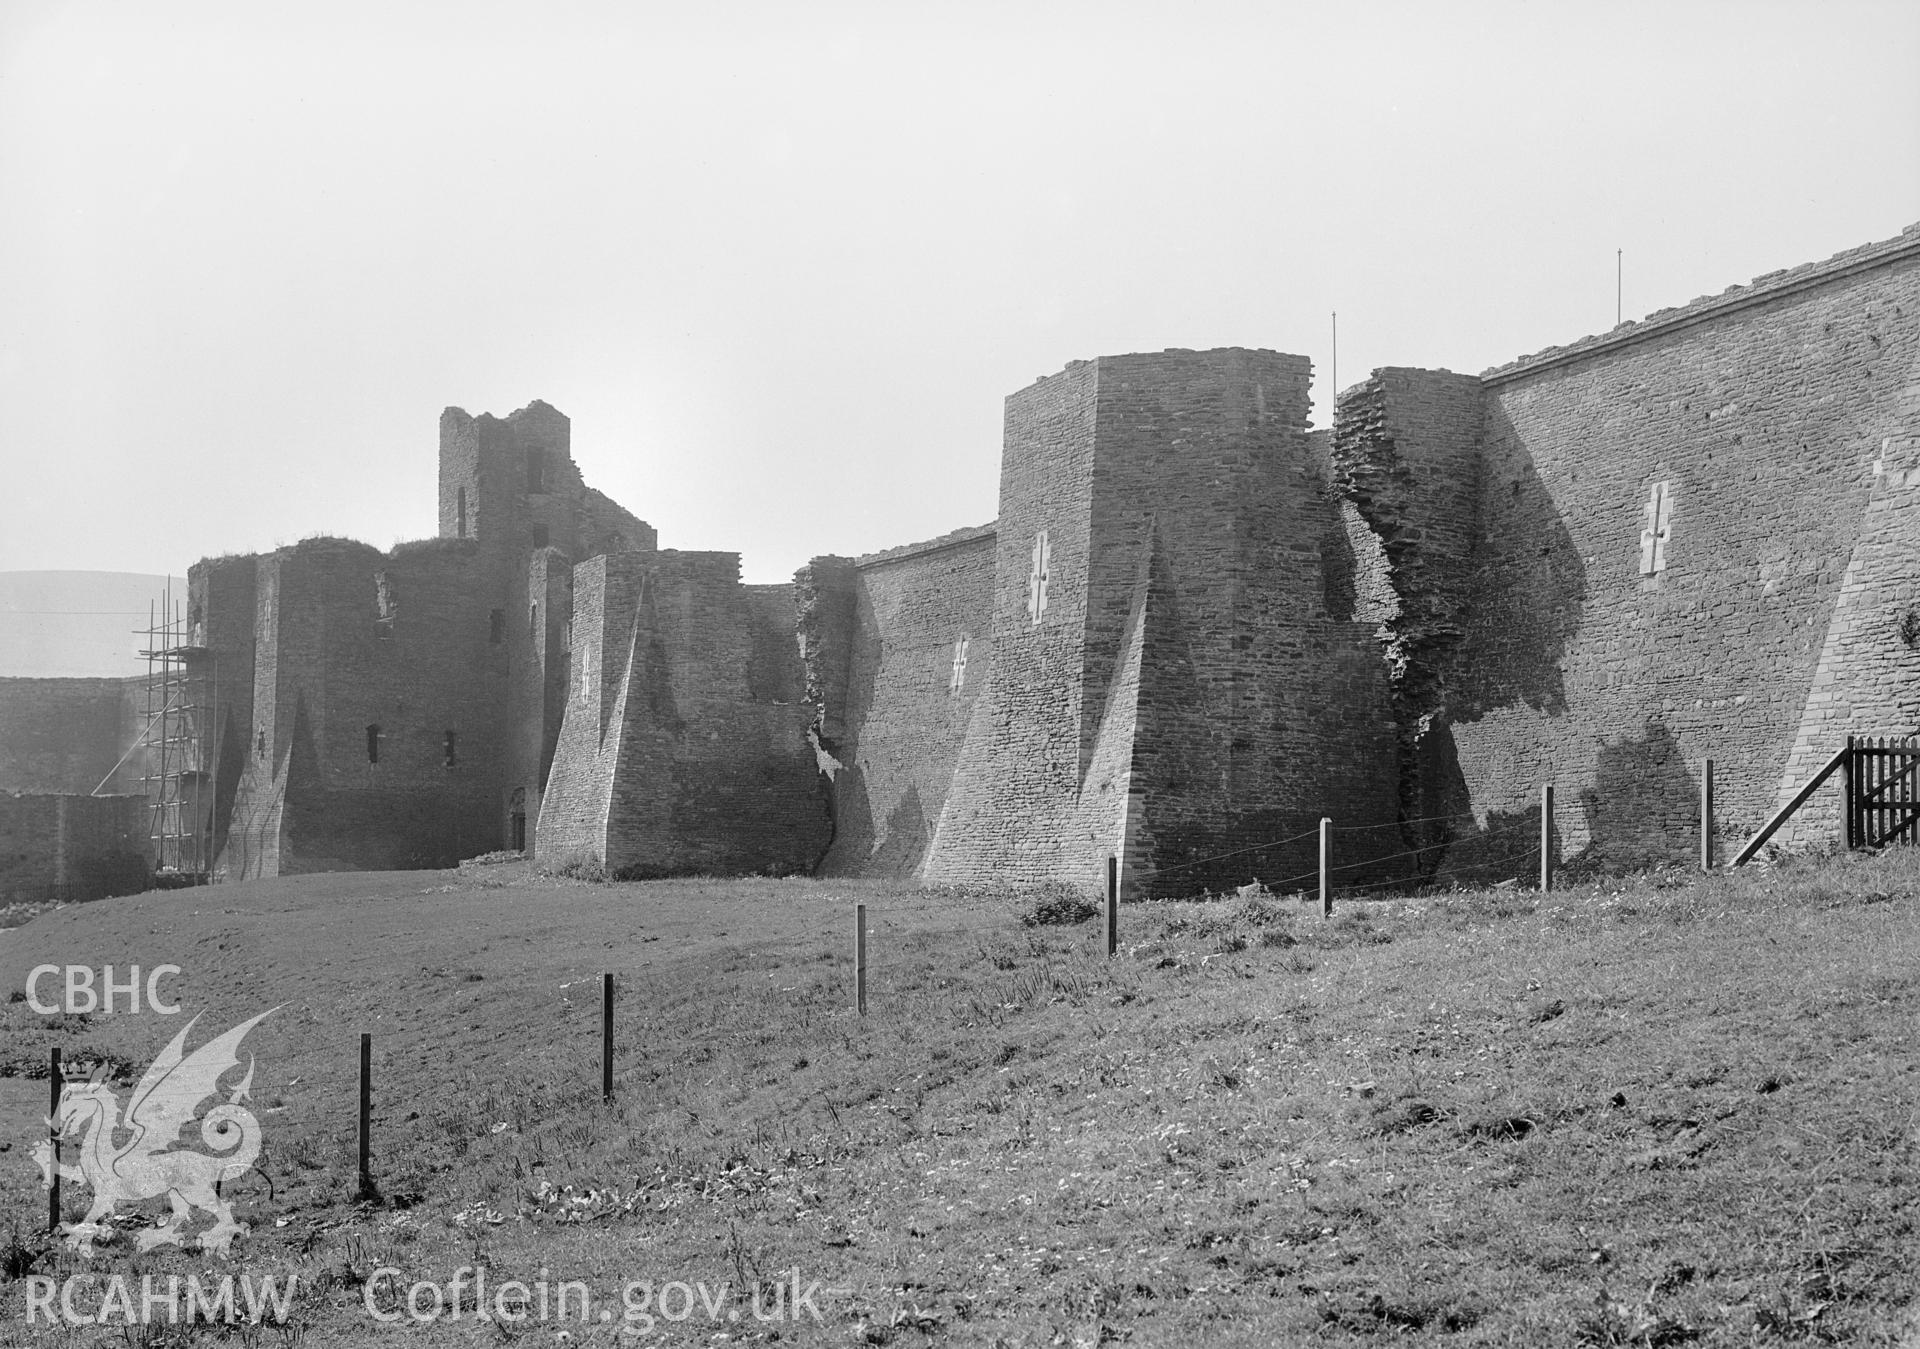 Exterior view of Caerphilly Castle outer wall from the north east, taken by Clayton.